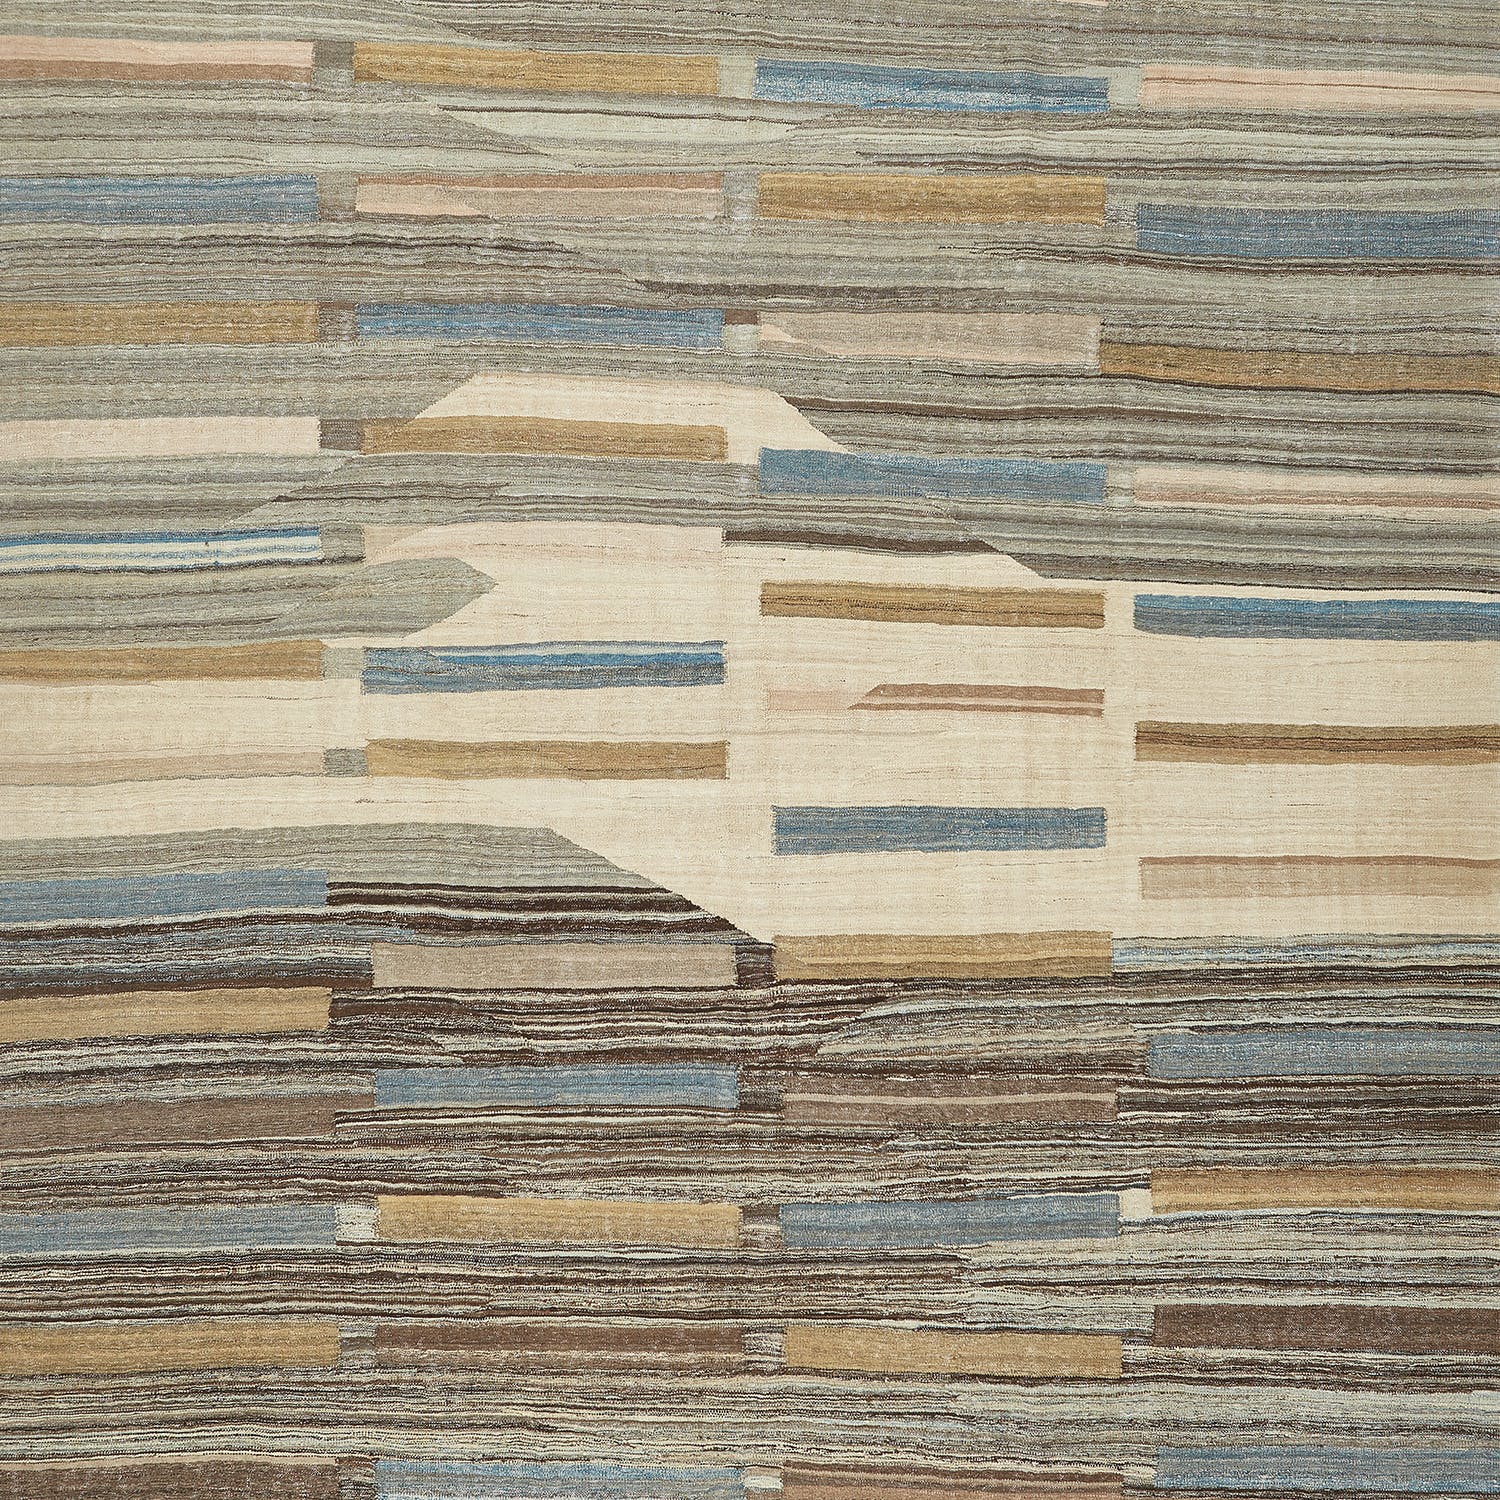 Abstract natural pattern with rhythmic lines and earthy color palette.